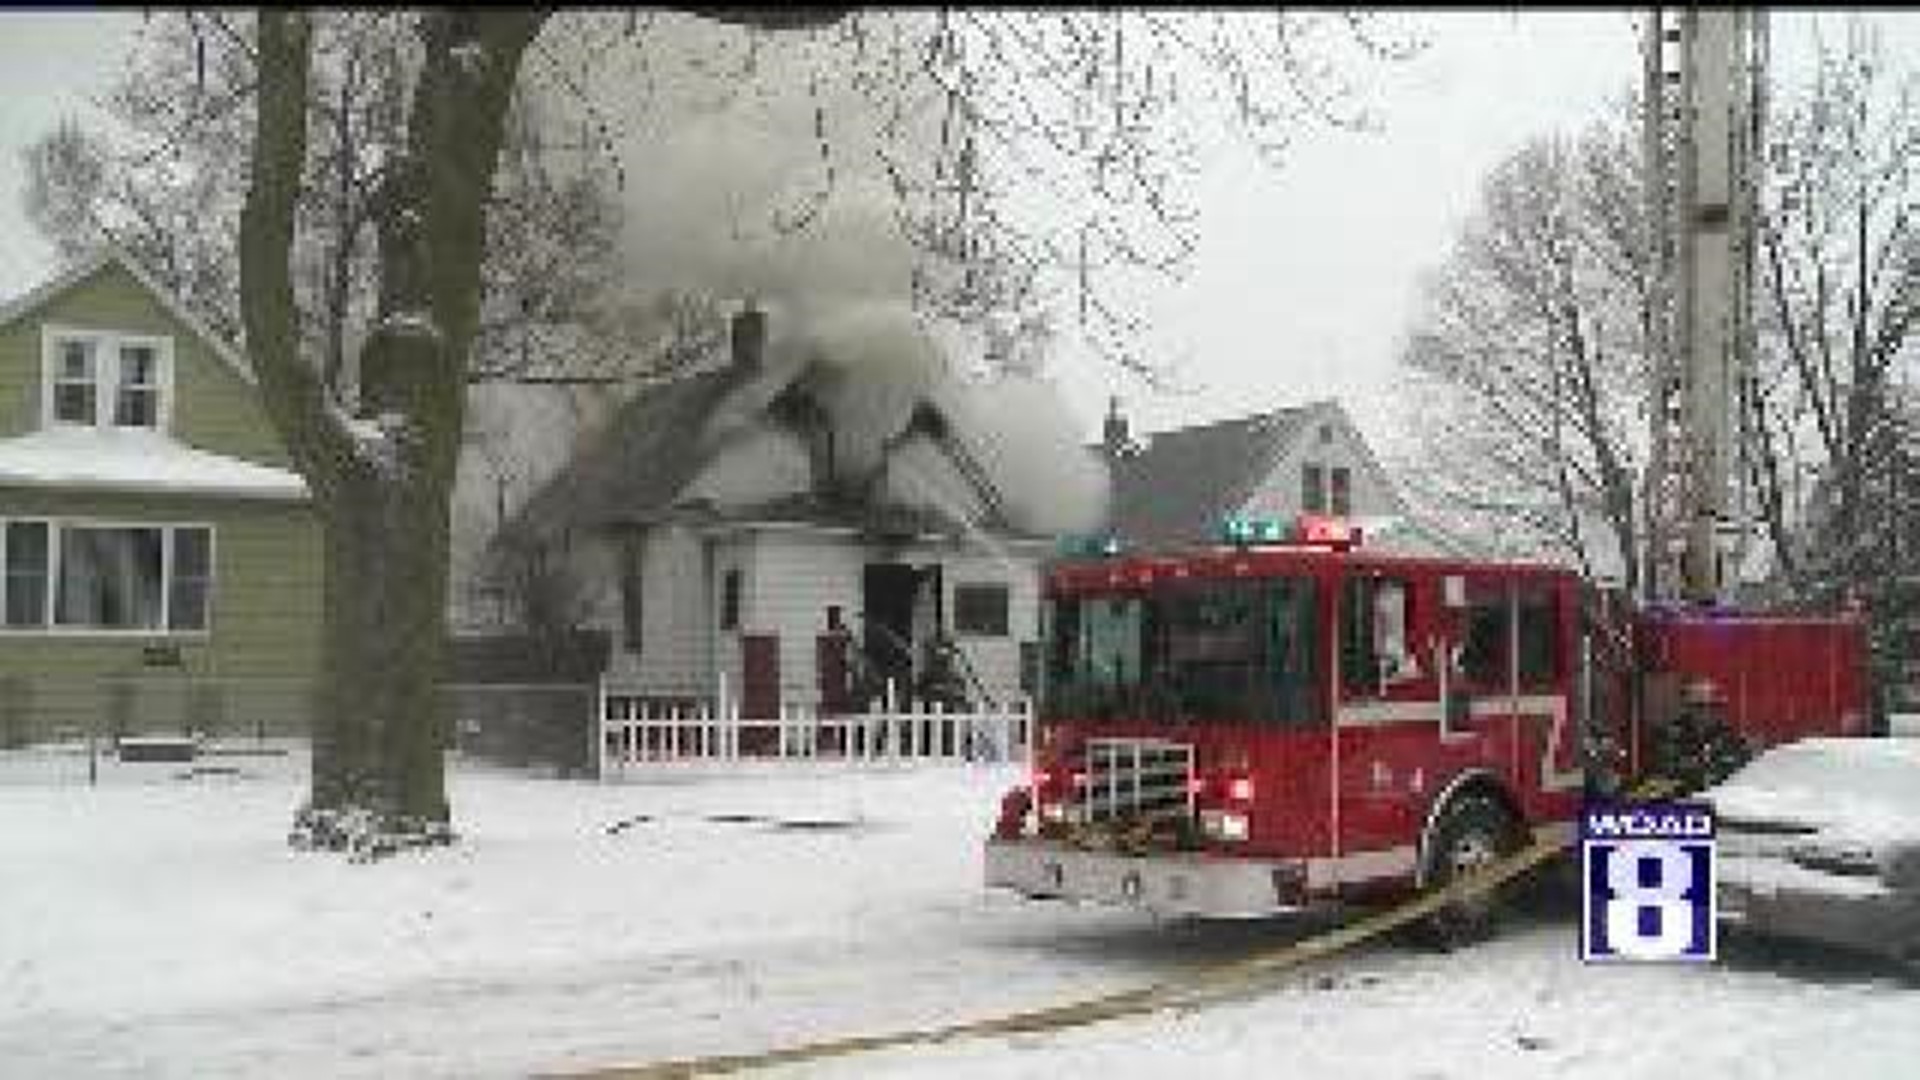 Heros emerge to help save others from a Rock Island house fire